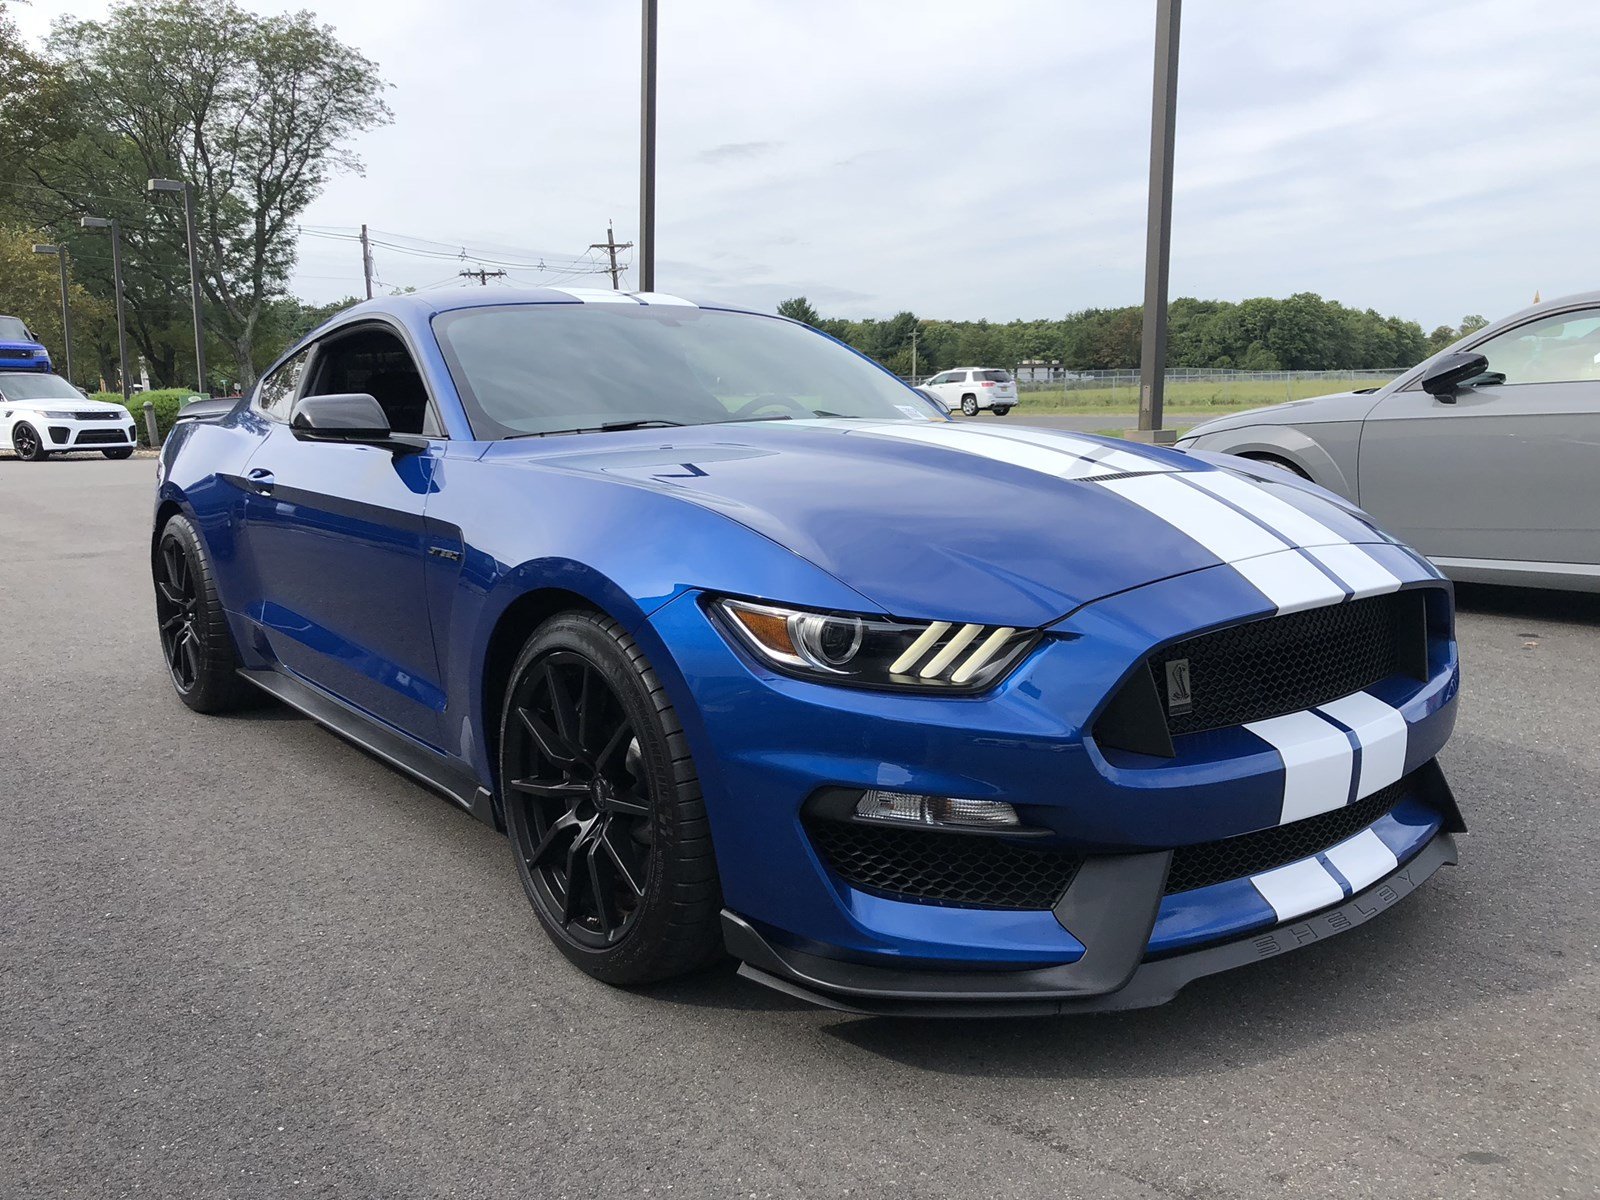 PreOwned 2017 Ford Mustang Shelby GT350 2dr Car in